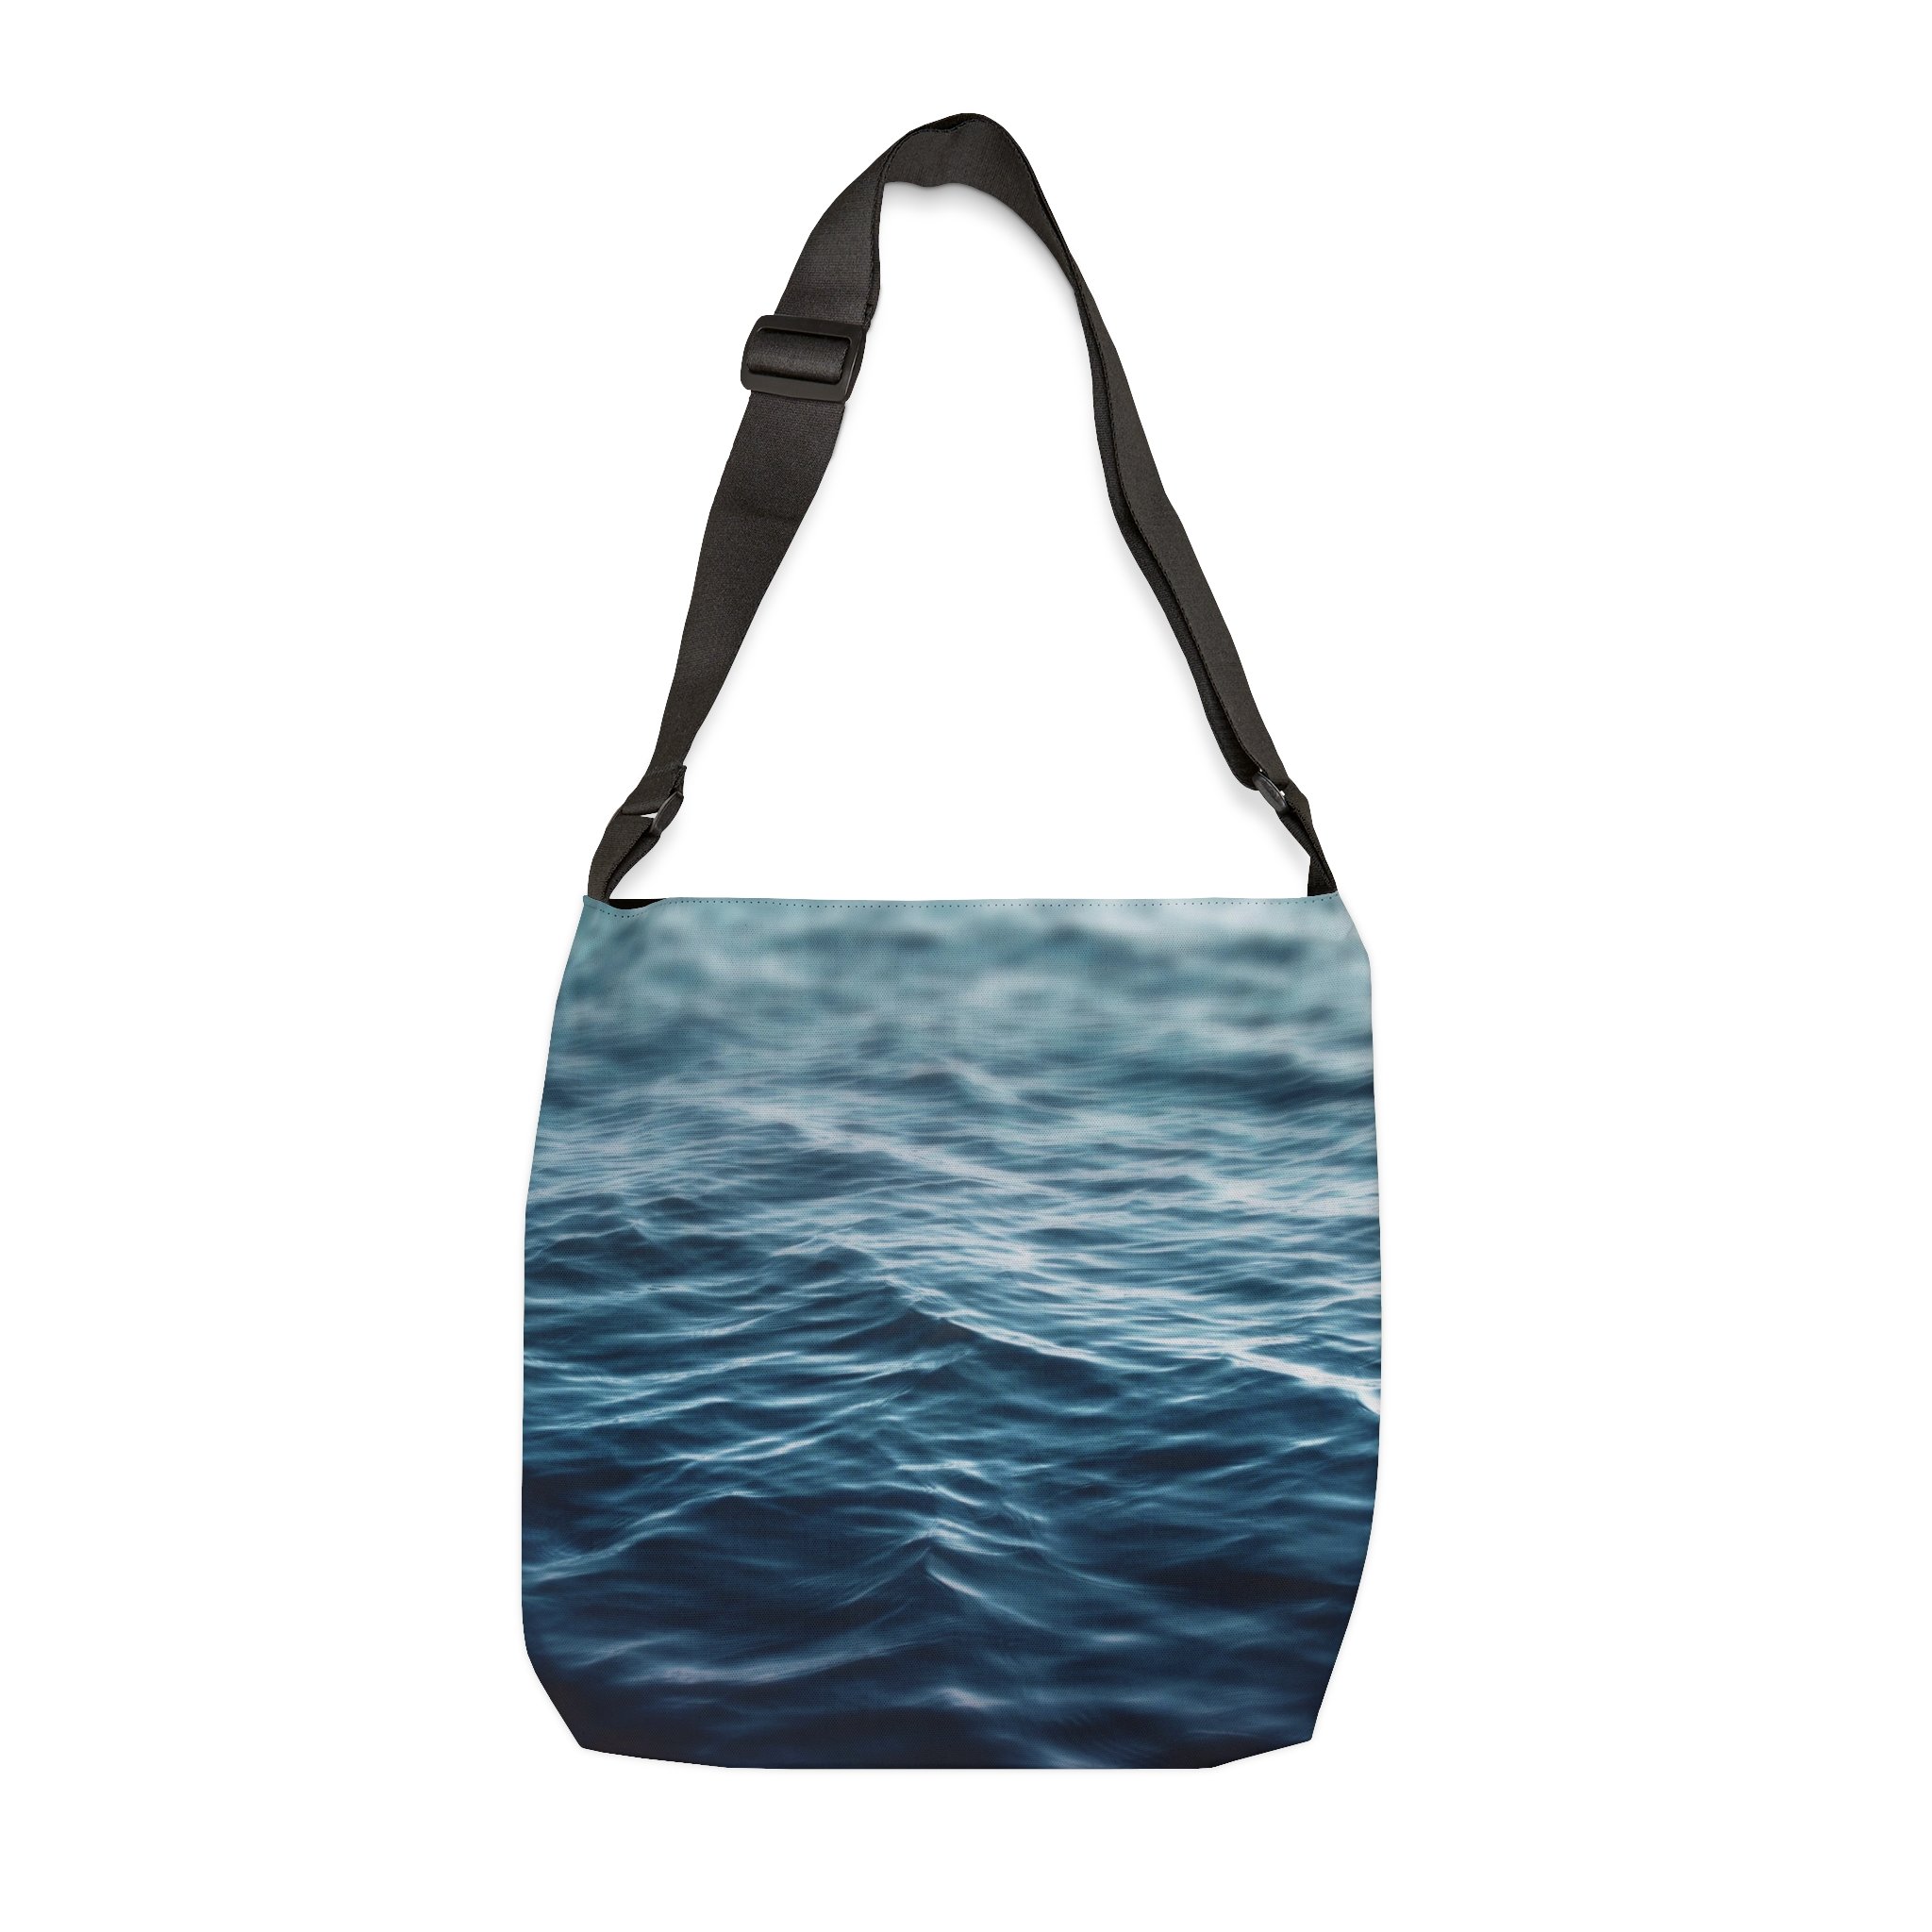 All Tote Bags — Beach Surf Decor by Nature | City Co.